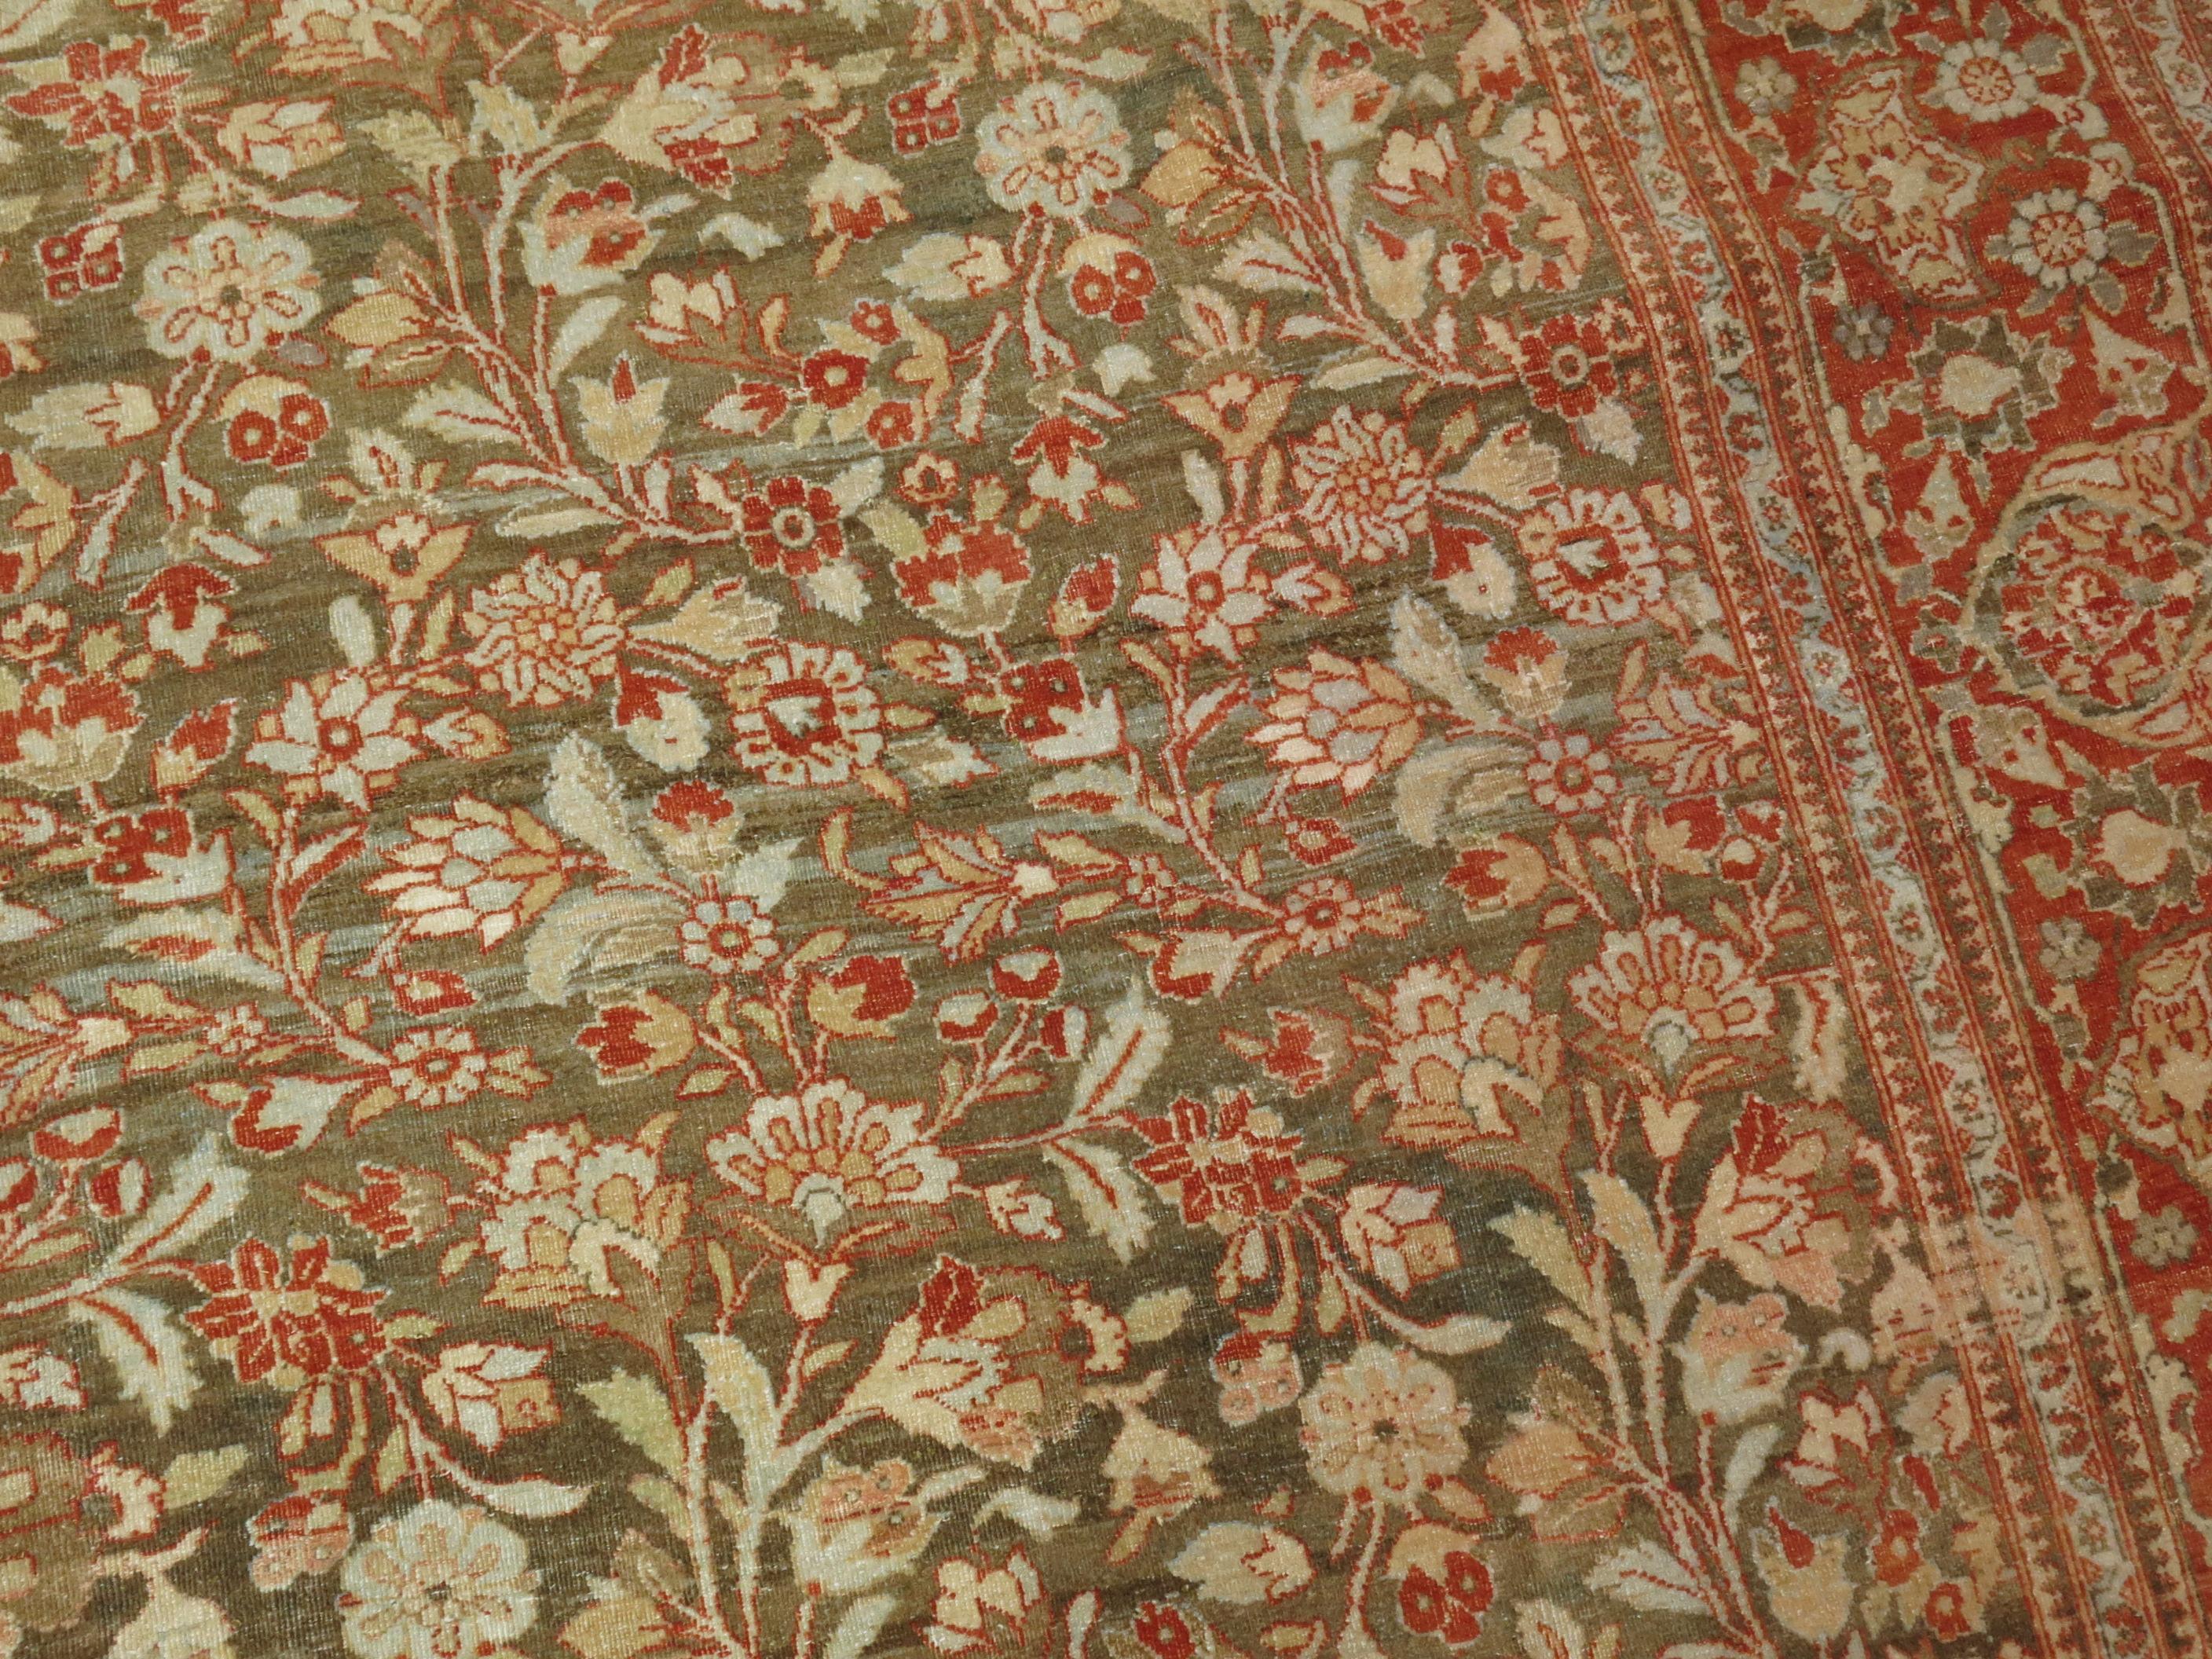 An early 20th century Persian Tabriz rug with an elegant all-over floral pattern on an abrashed brown field

Measures: 8'6'' x 11'5''.